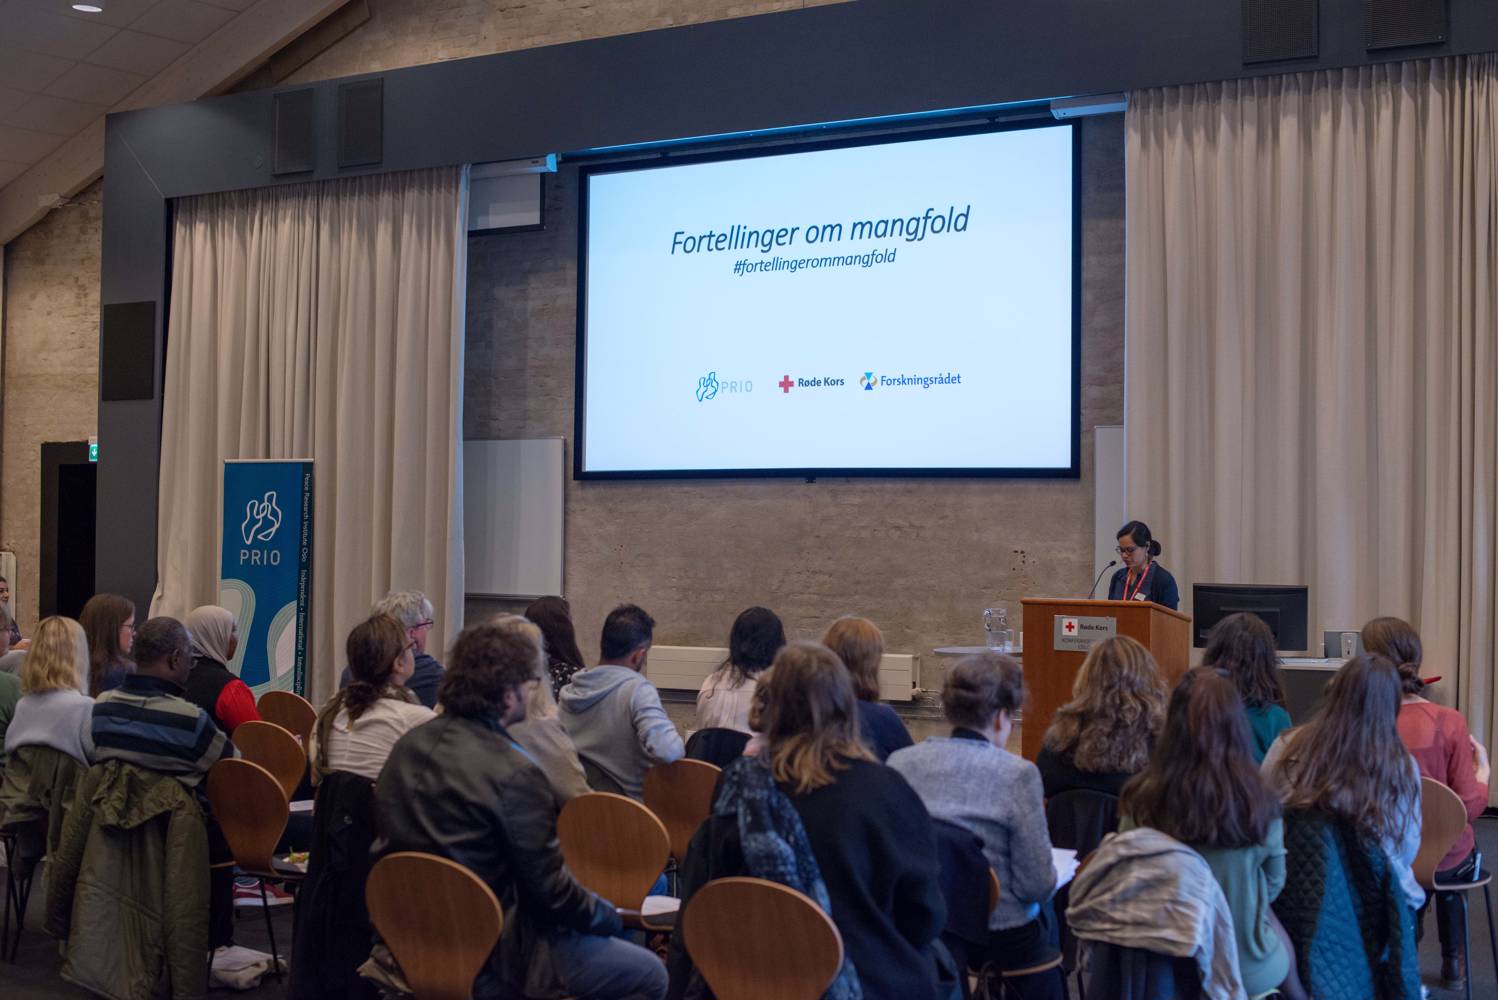 'Fortellinger om Mangfold' is a collaboration between PRIO and the Red Cross. Photo: PRIO